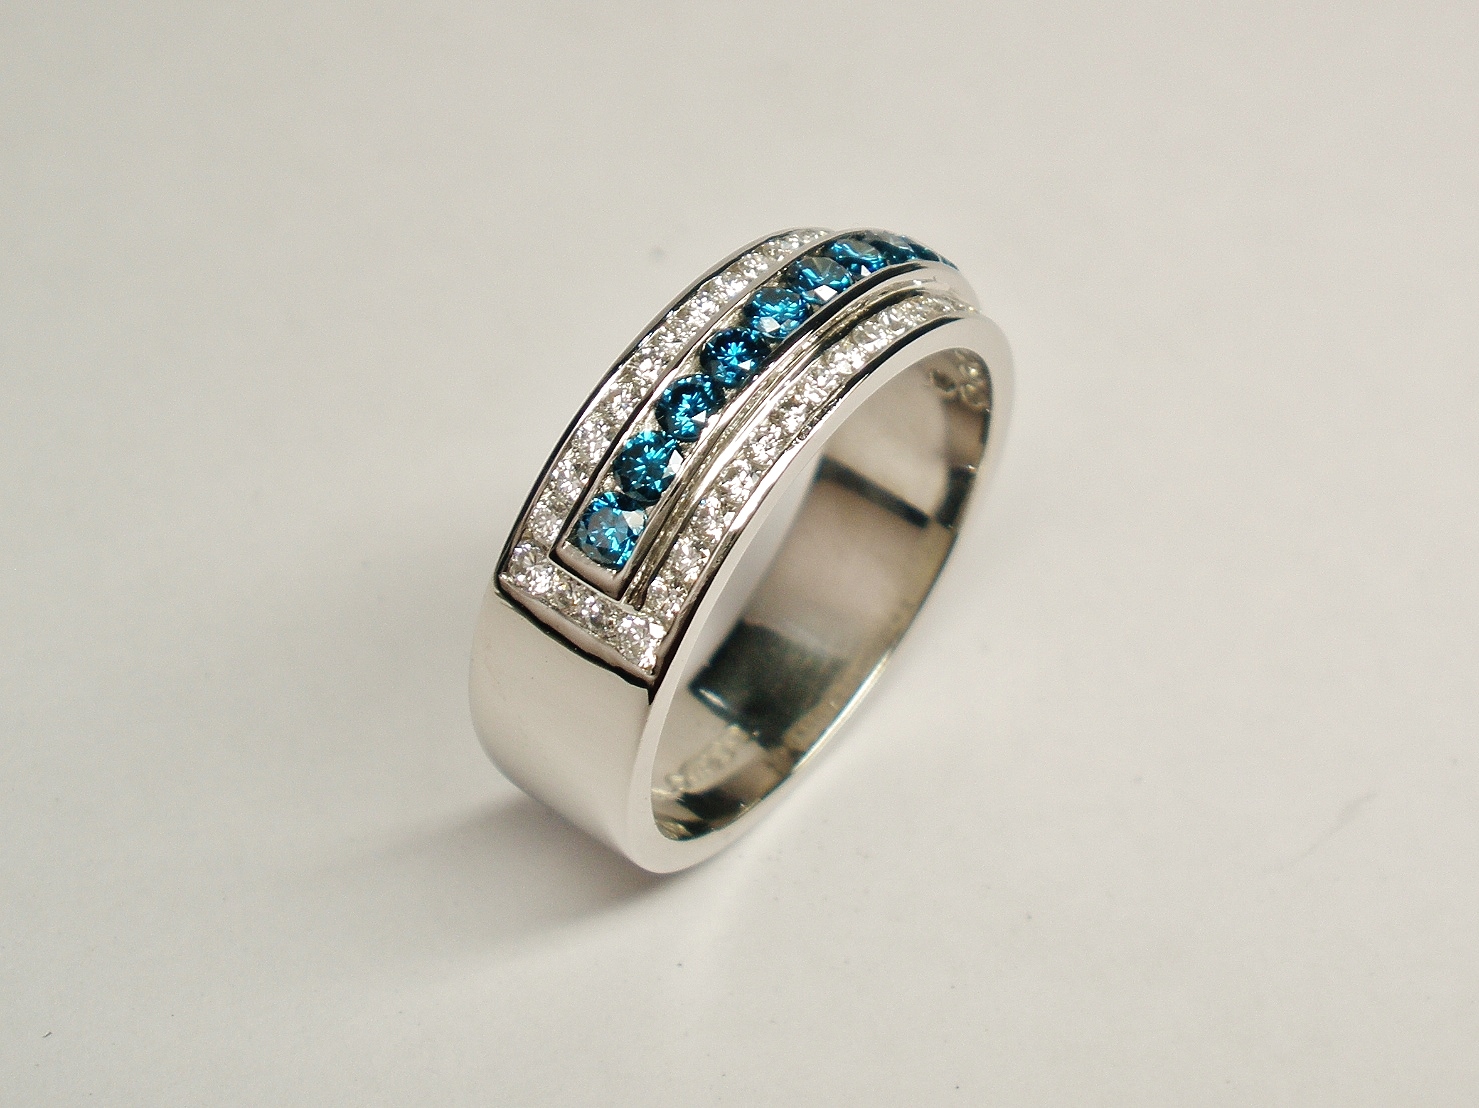 3a. A 53 stone channel set ocean blue and white round brilliant cut diamond ring mounted in platinum. The ocean blue diamonds are raised a little higher across the top.